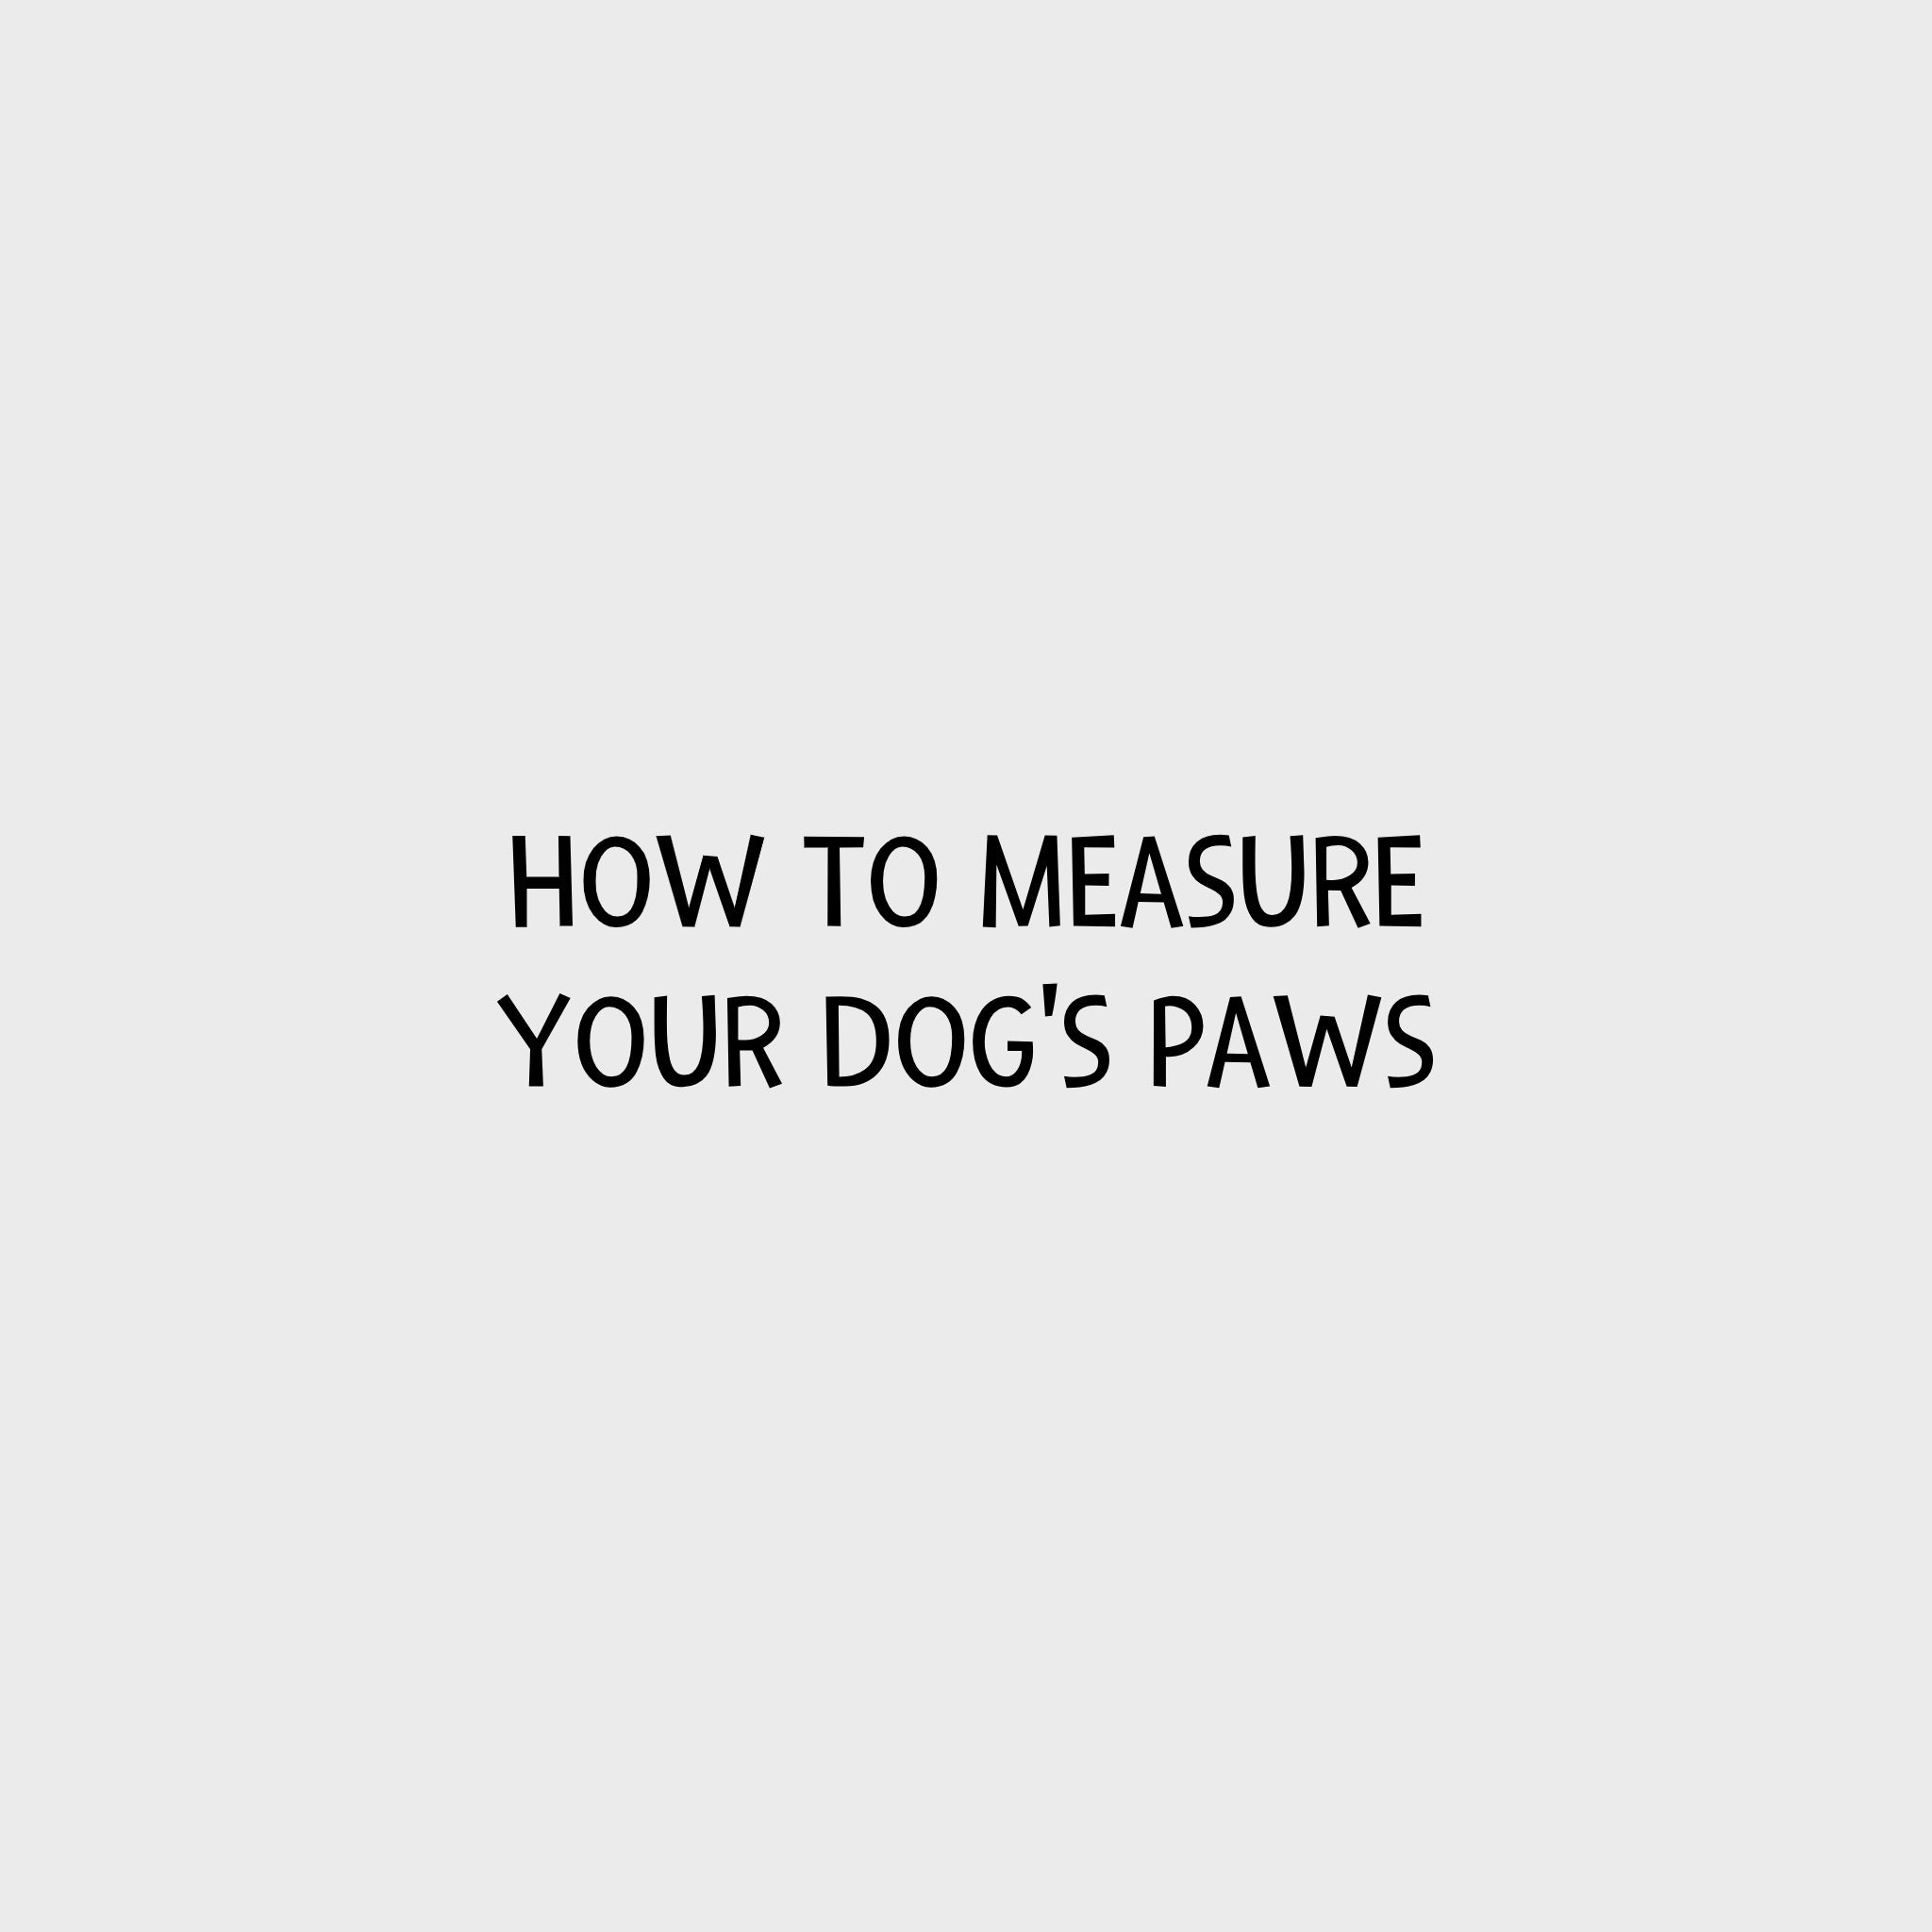 Video - How to measure your dog's paws